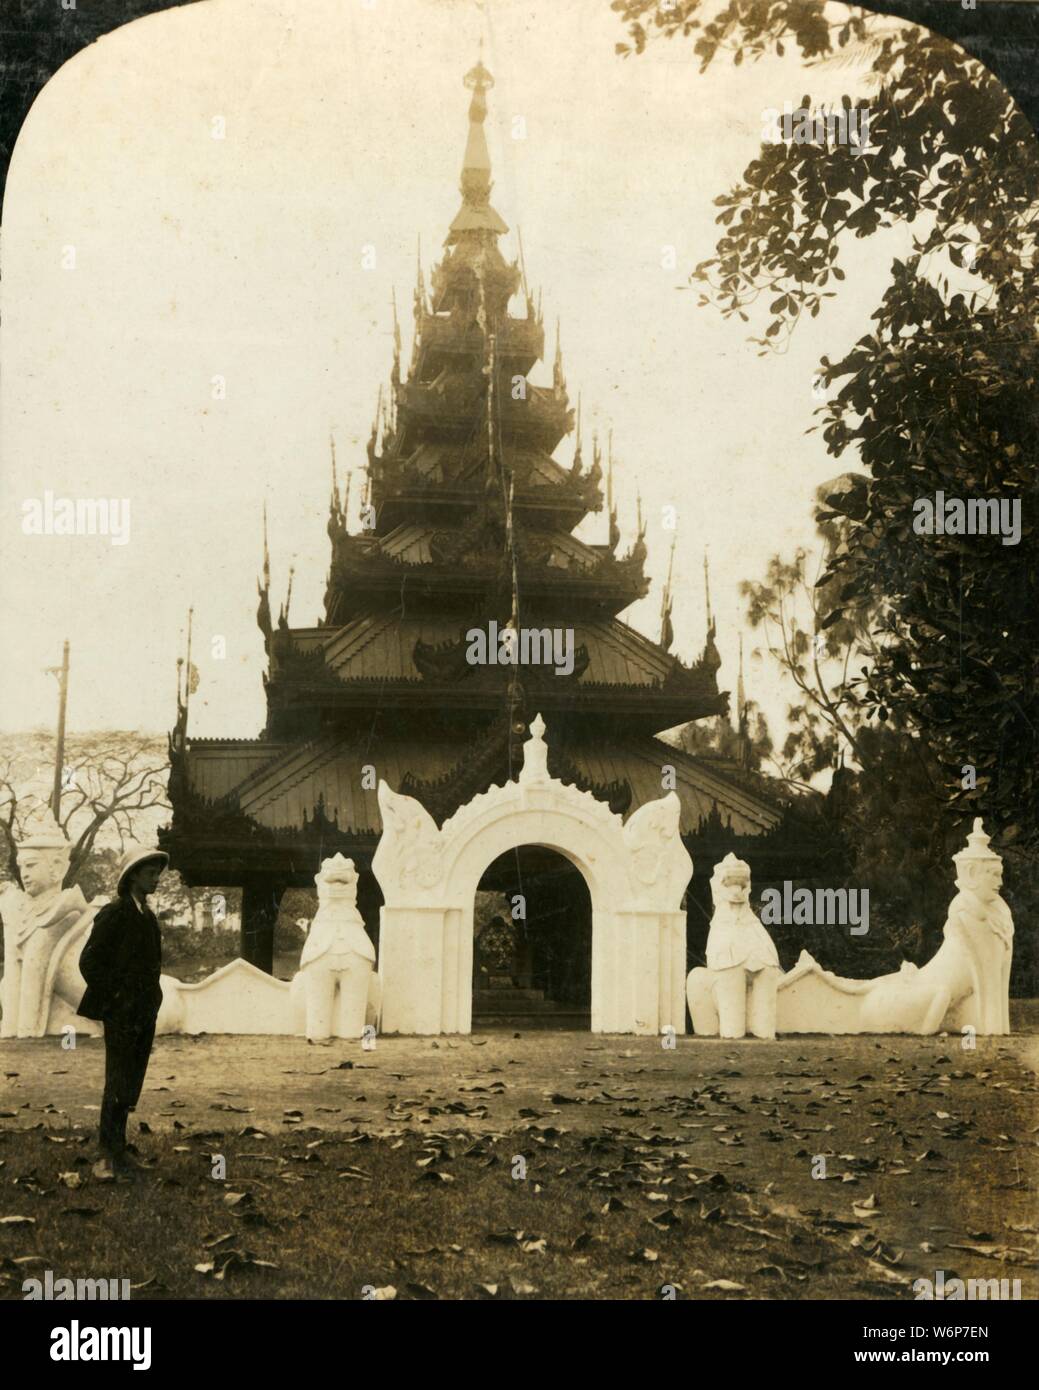 'Burmese Pagoda, Eden Gardens, Calcutta', c1909. The Buddhist pagoda was brought from Prome in Burma in 1854 by Lord Dalhousie and erected in the gardens in what is now Kolkata, India. One of a set of stereocard views by George Rose, boxed as &quot;Studies through the Stereoscope&quot;, to be viewed on a Sun Sculpture stereoscope made by Underwood &amp; Underwood. [The Rose Stereograph Company, Melbourne, Sydney, Wellington &amp; London, c1909] Stock Photo